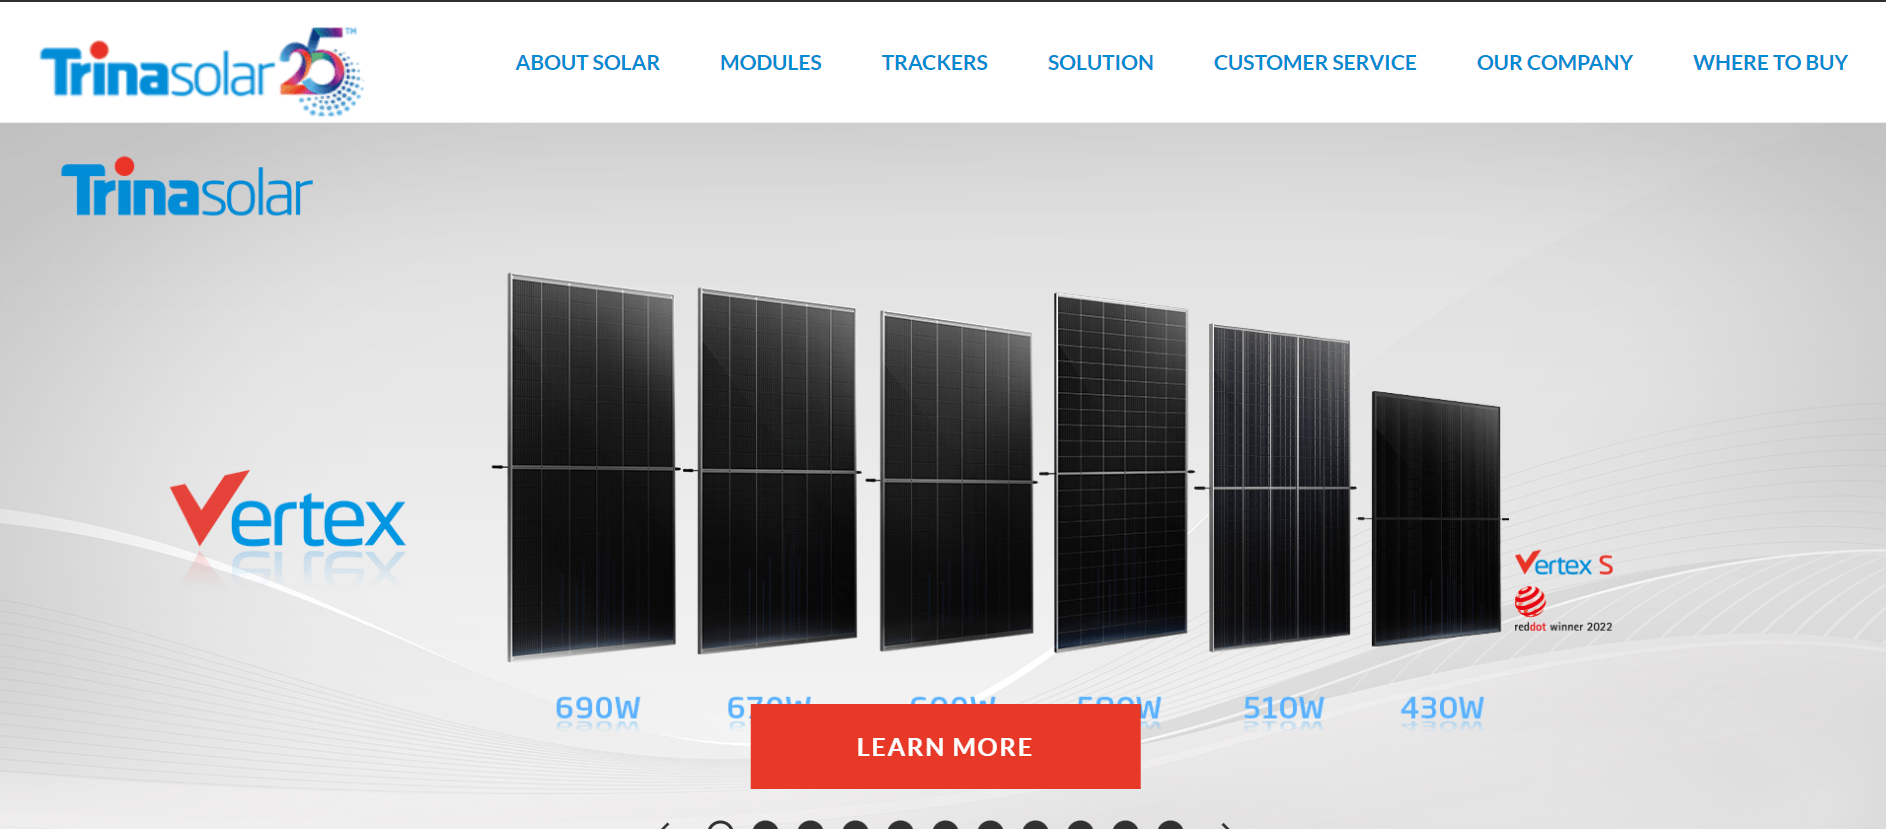 What Is The Best Brand For Solar Panels In Australia? Best Brand For Solar Panels In Australia